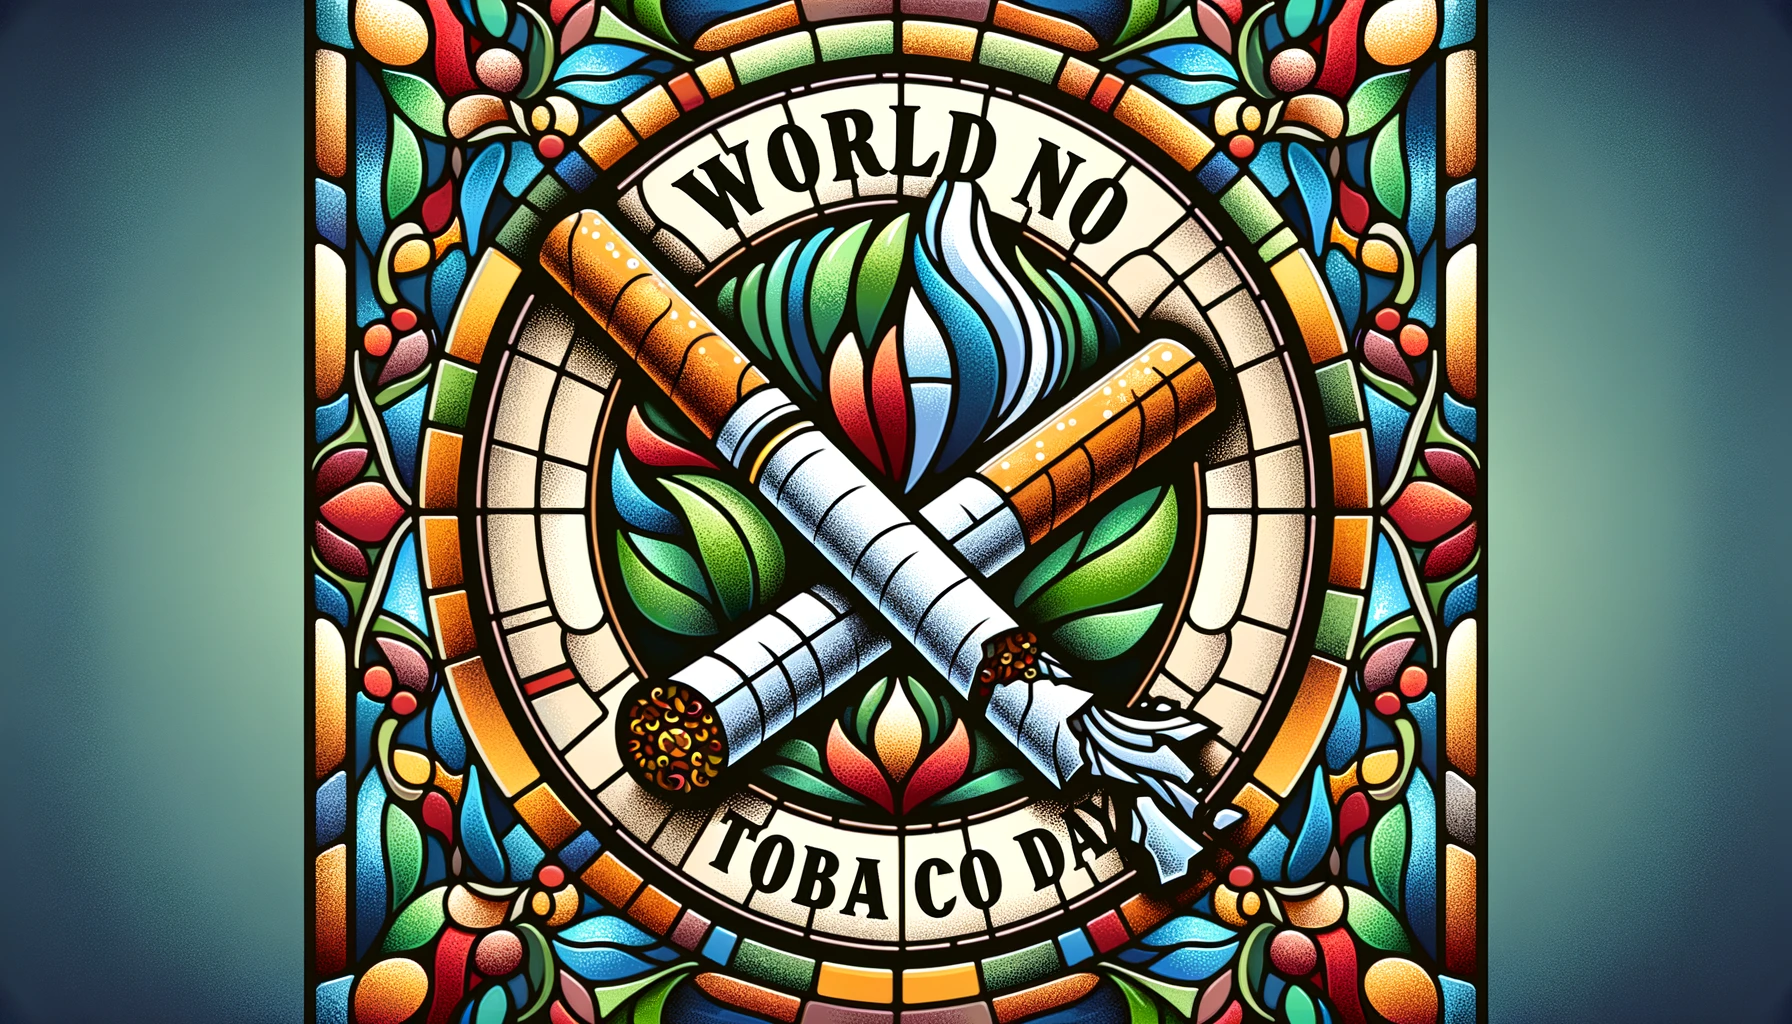 Supportive World No Tobacco Day Wishes for Loved Ones